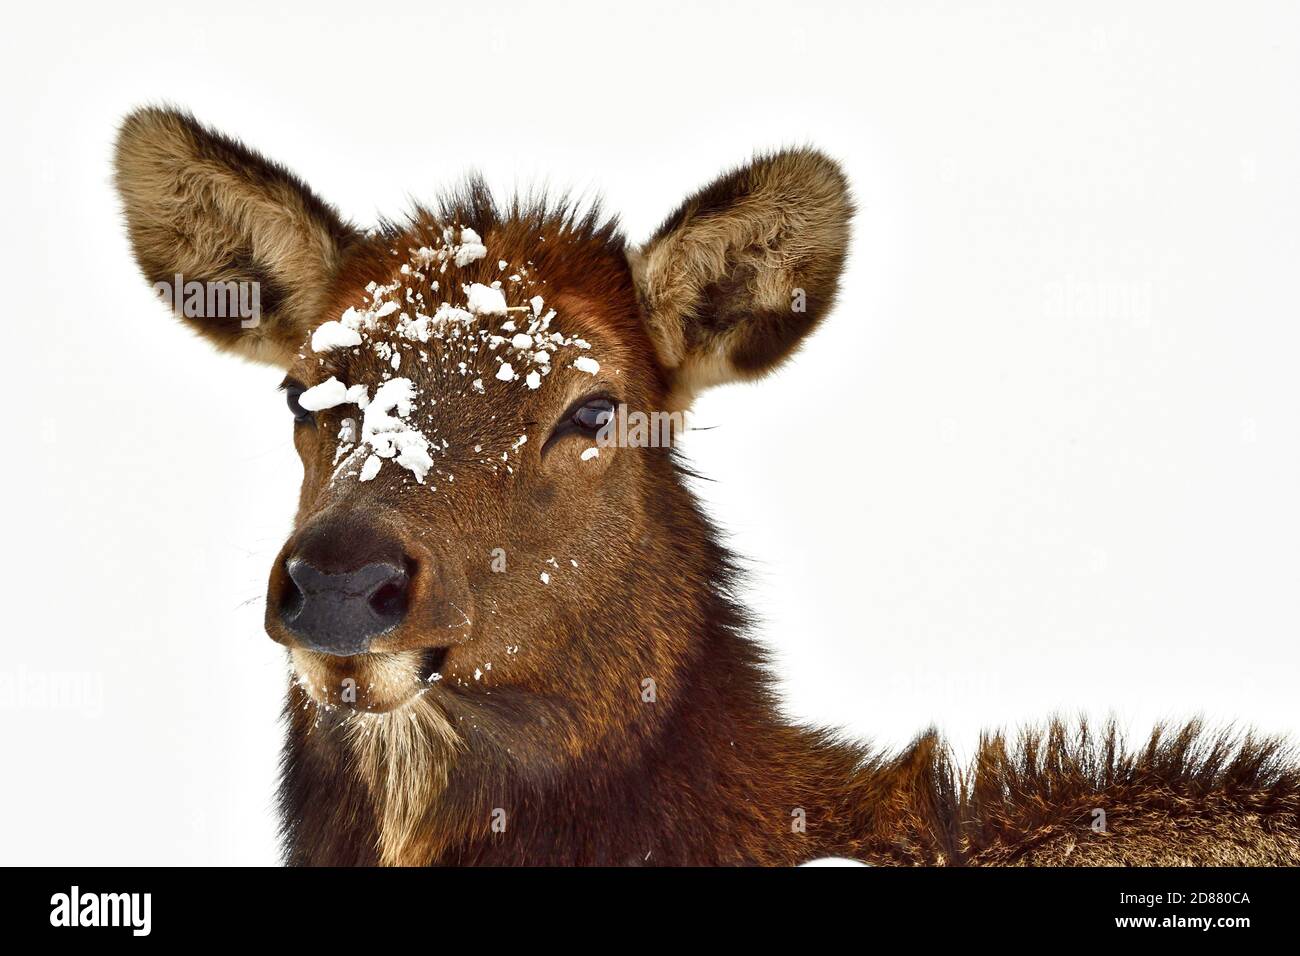 A portrait image of a female elk 'Cervus elaphus', face and head on a white background in rural Alberta Canada Stock Photo